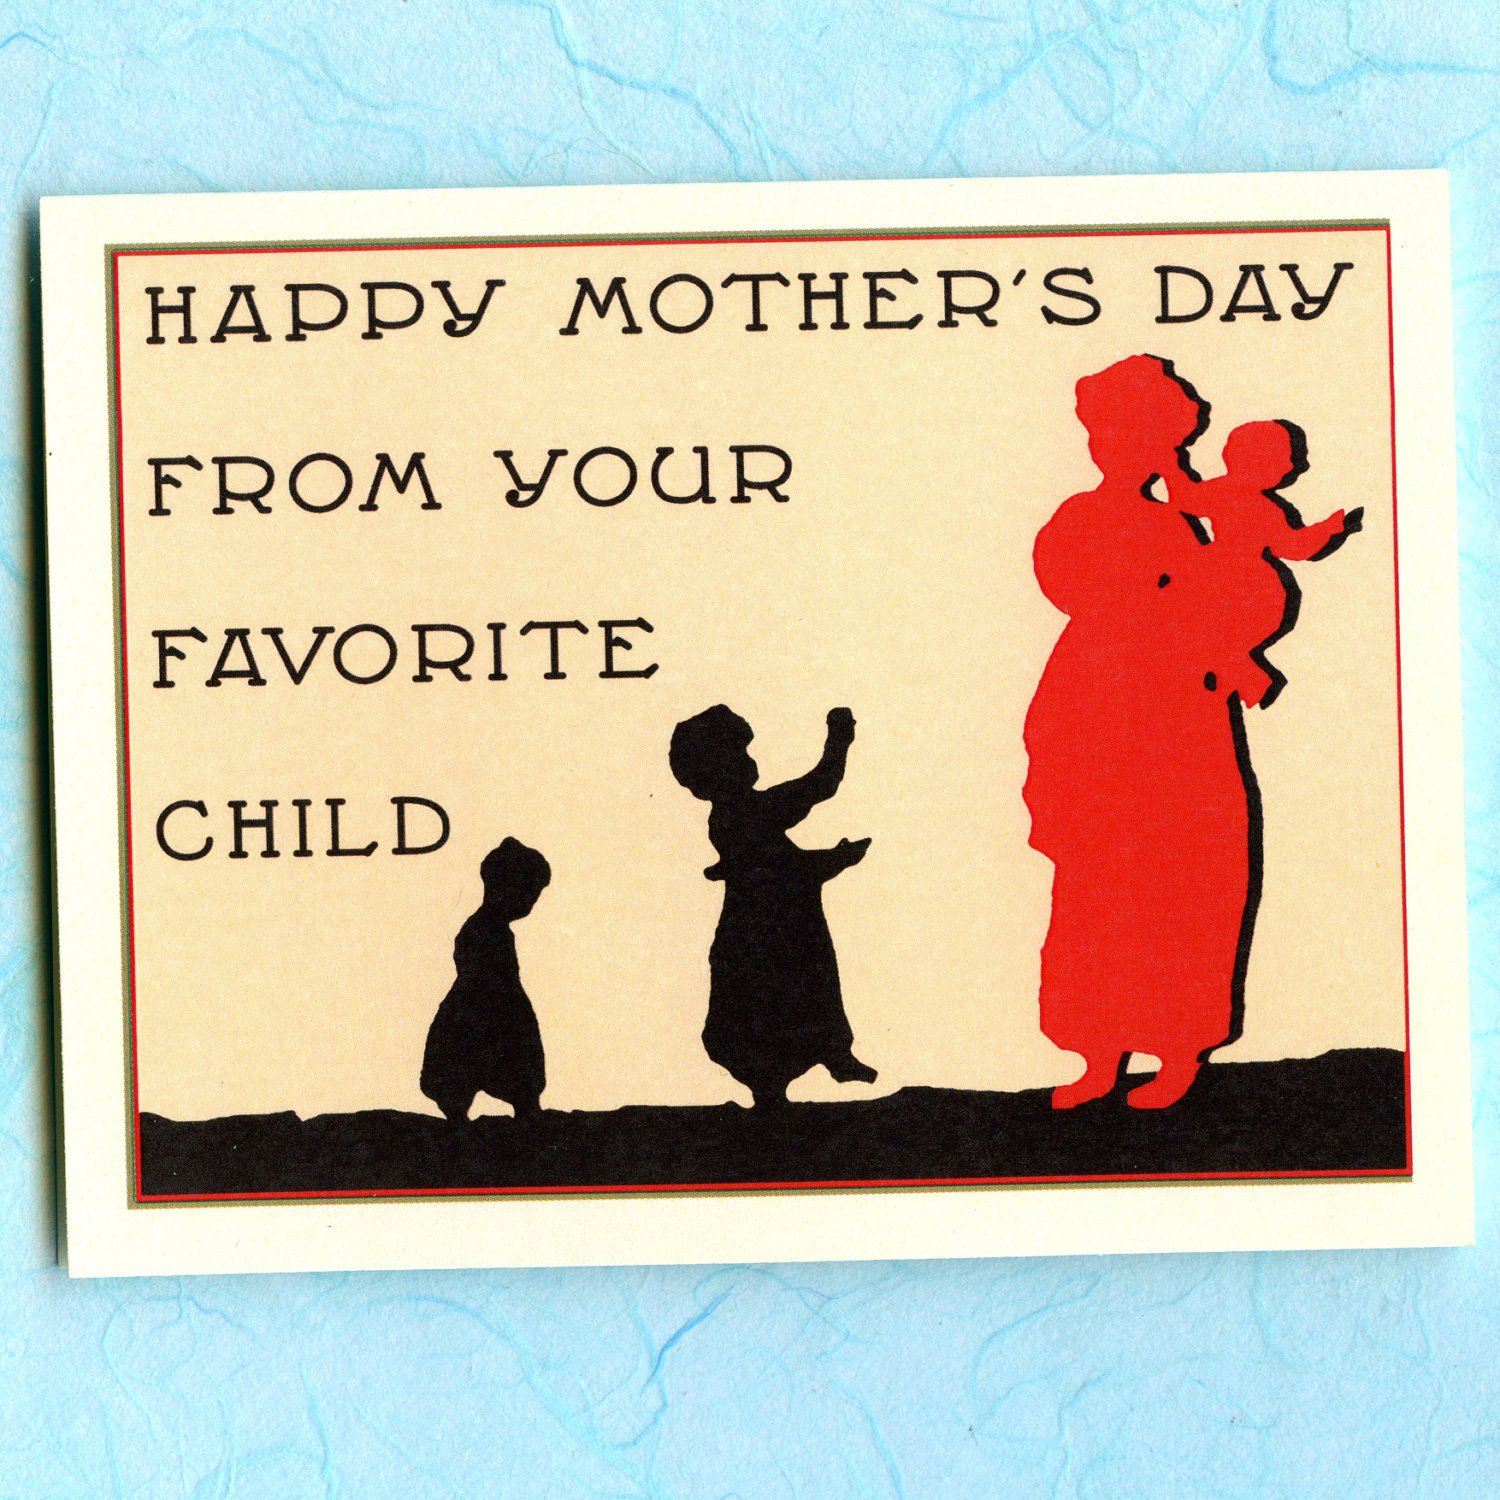 Funny Quotes For Mothers Day
 Funny Quotes About Mothers Day QuotesGram